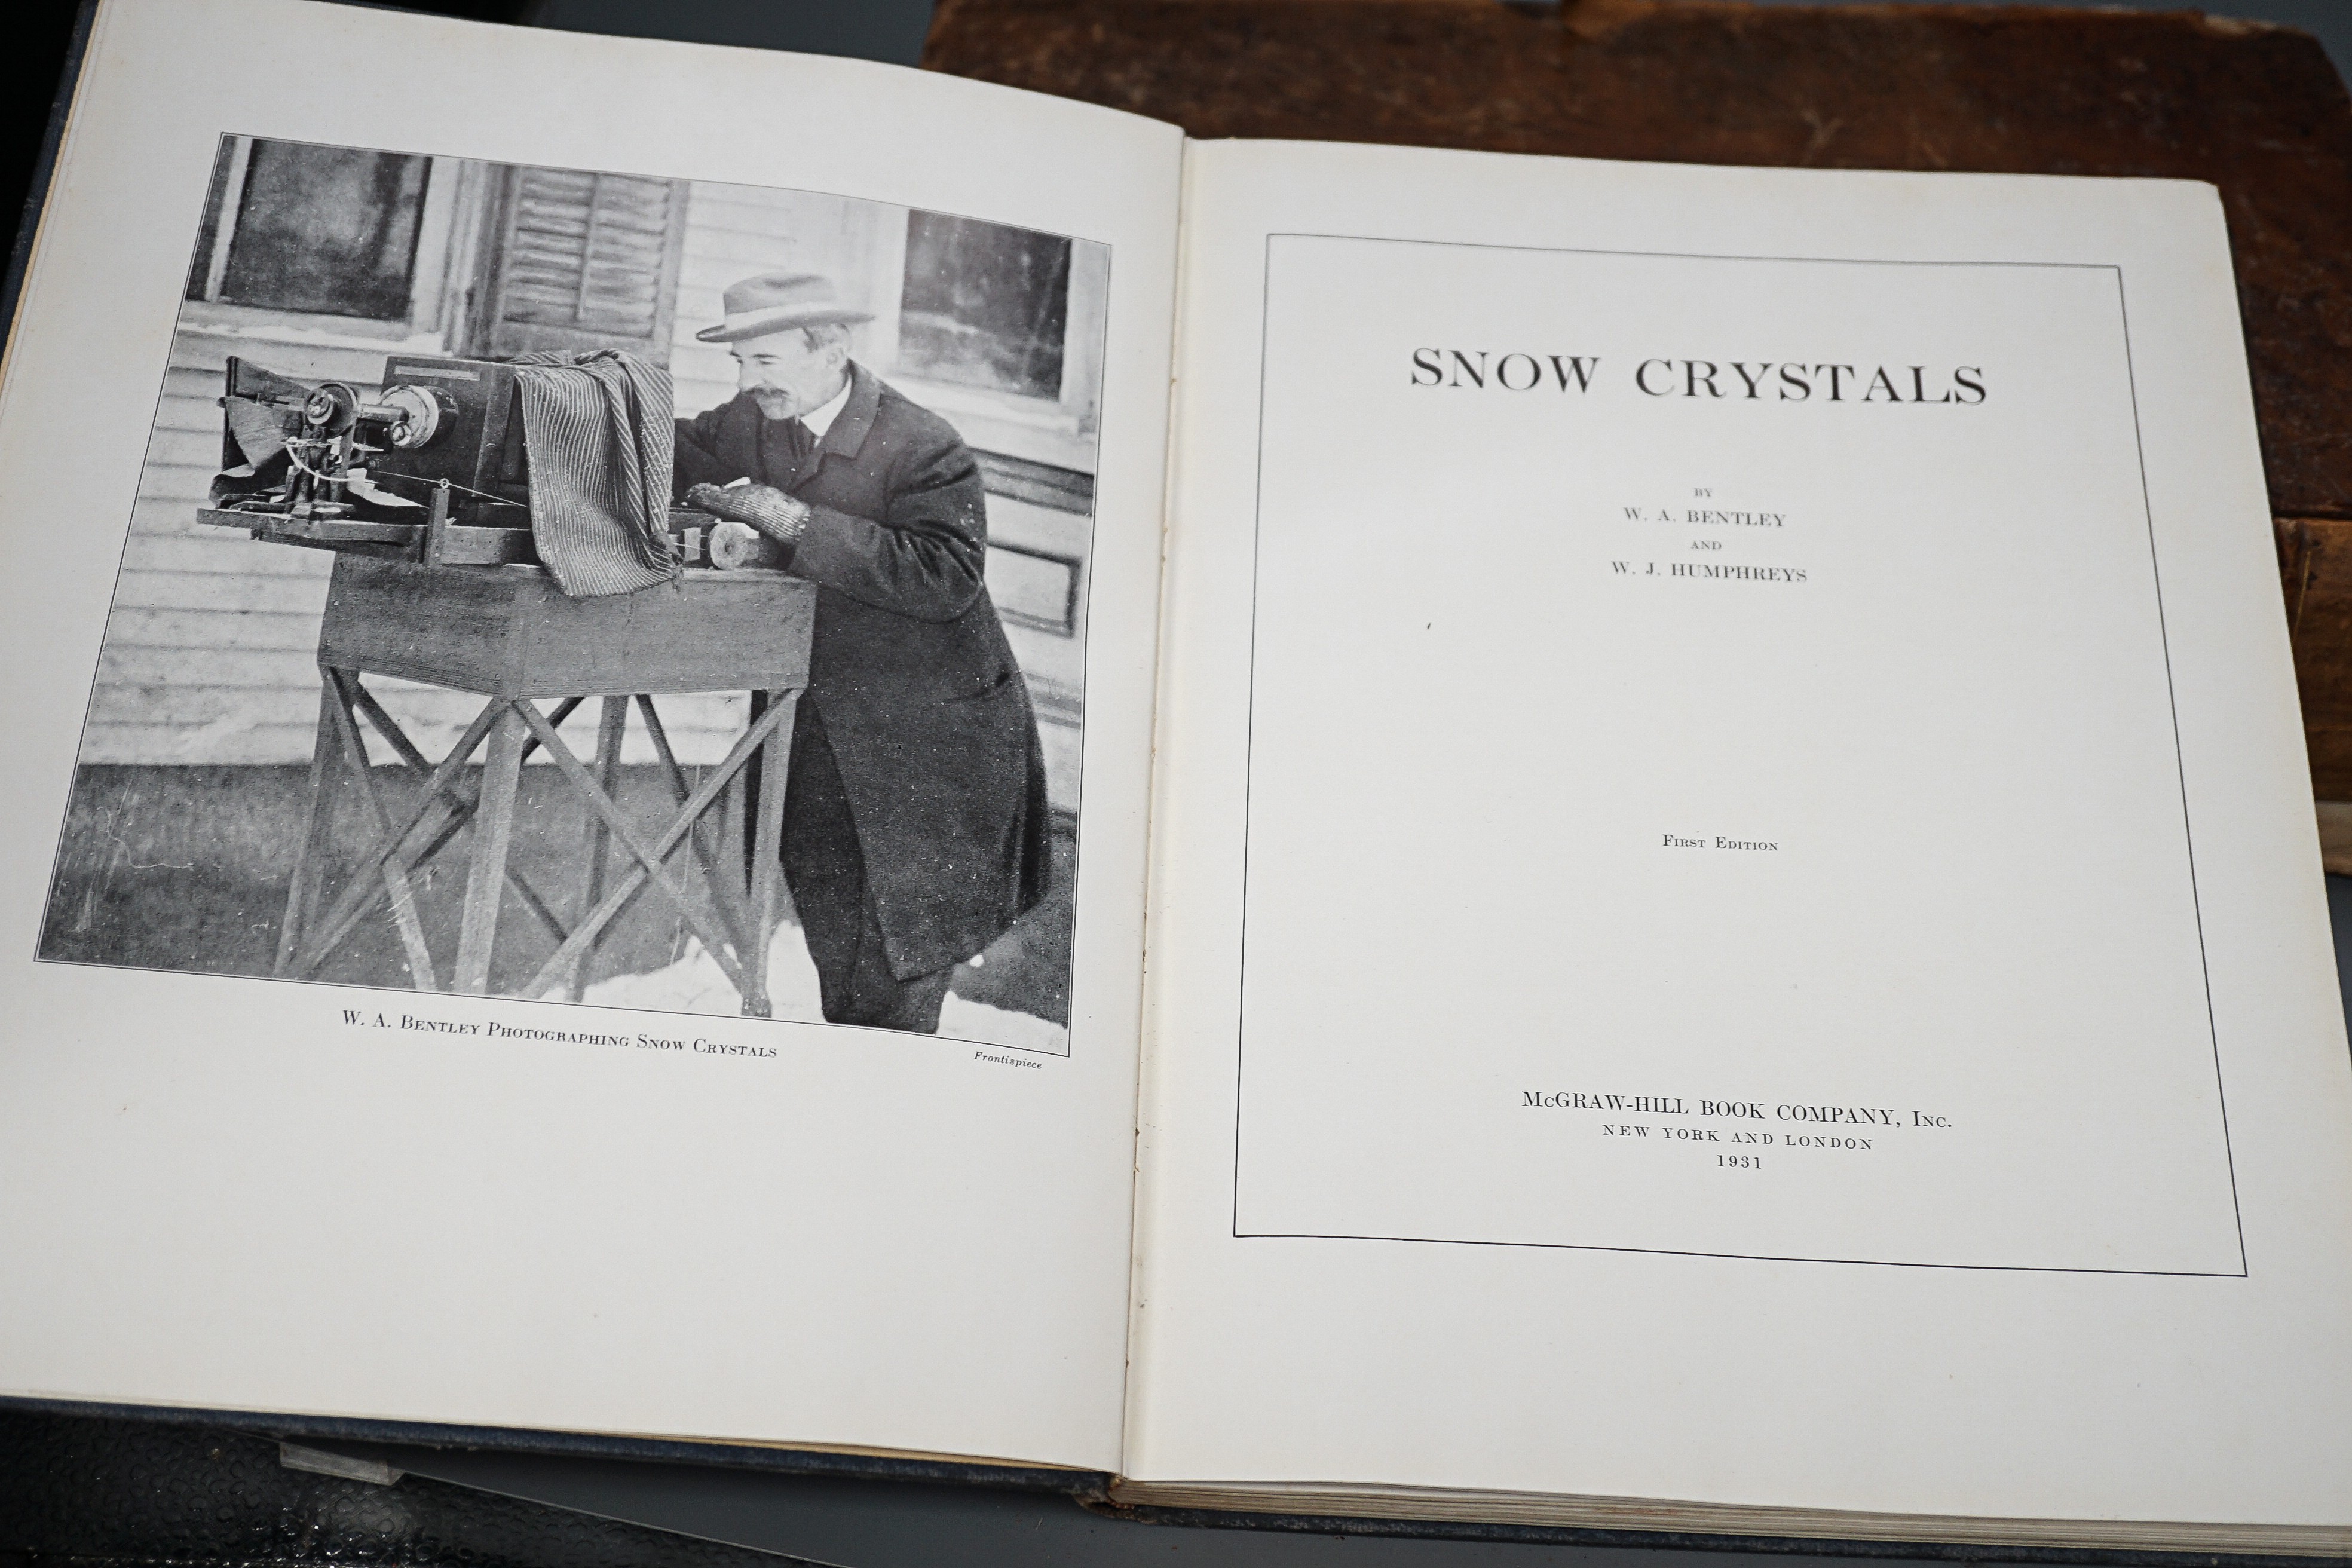 Bentley, Wilson Alwyn and Humphreys, William Jackson - Snow Crystals, 1st edition, qto, original cloth with gilt snowflake on front, spine and boards scuffed, McGraw - Hill Book Company, New York and London 1931 Footnote